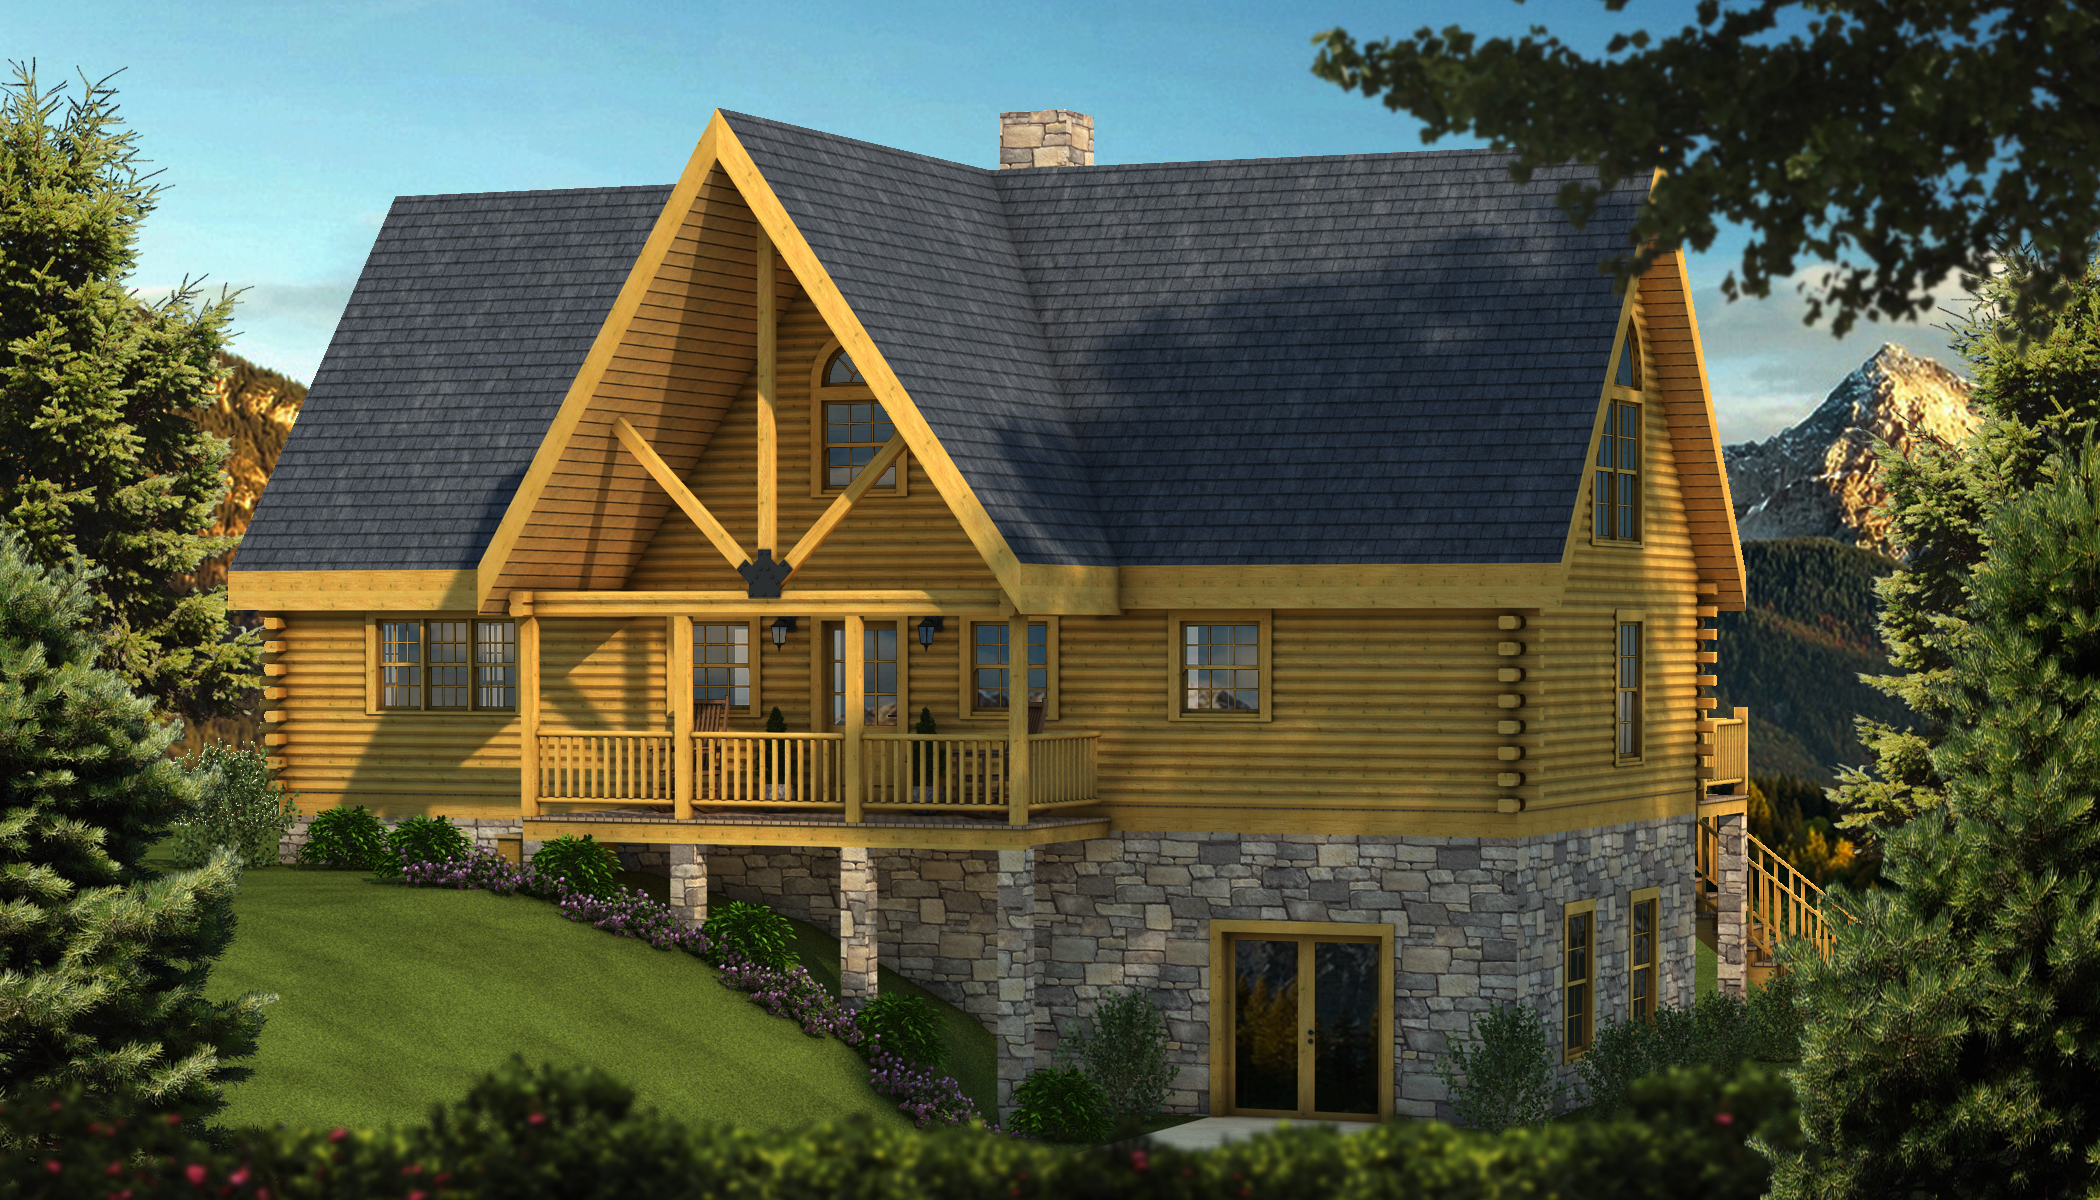 Adirondack Style House Plans Ideas Photo Gallery - Home 